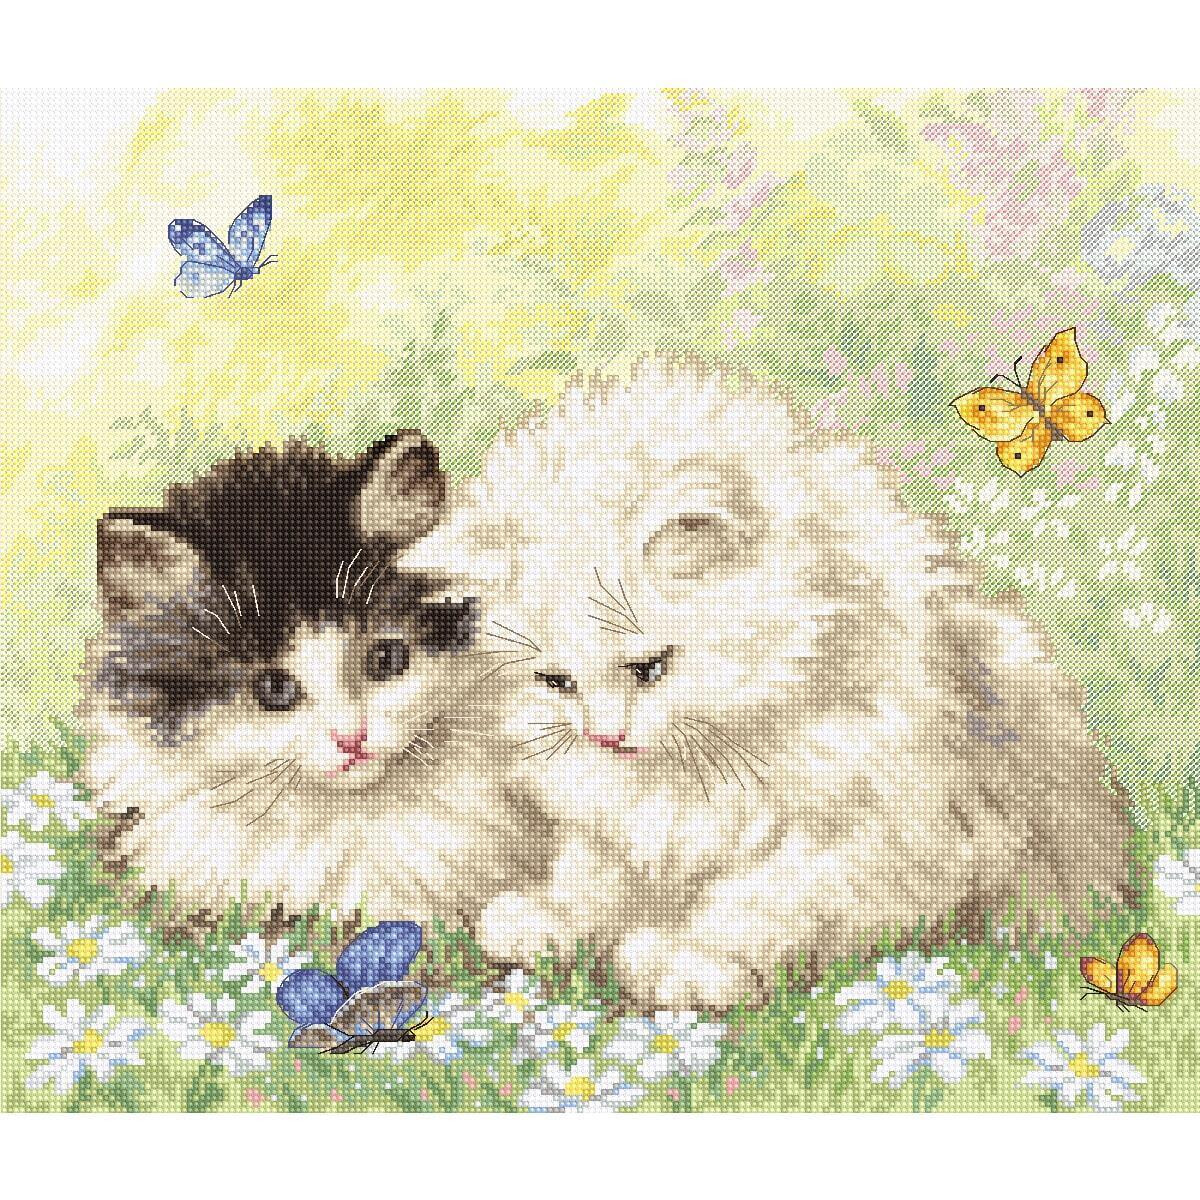 Letistitch counted cross stitch kit "Summer...